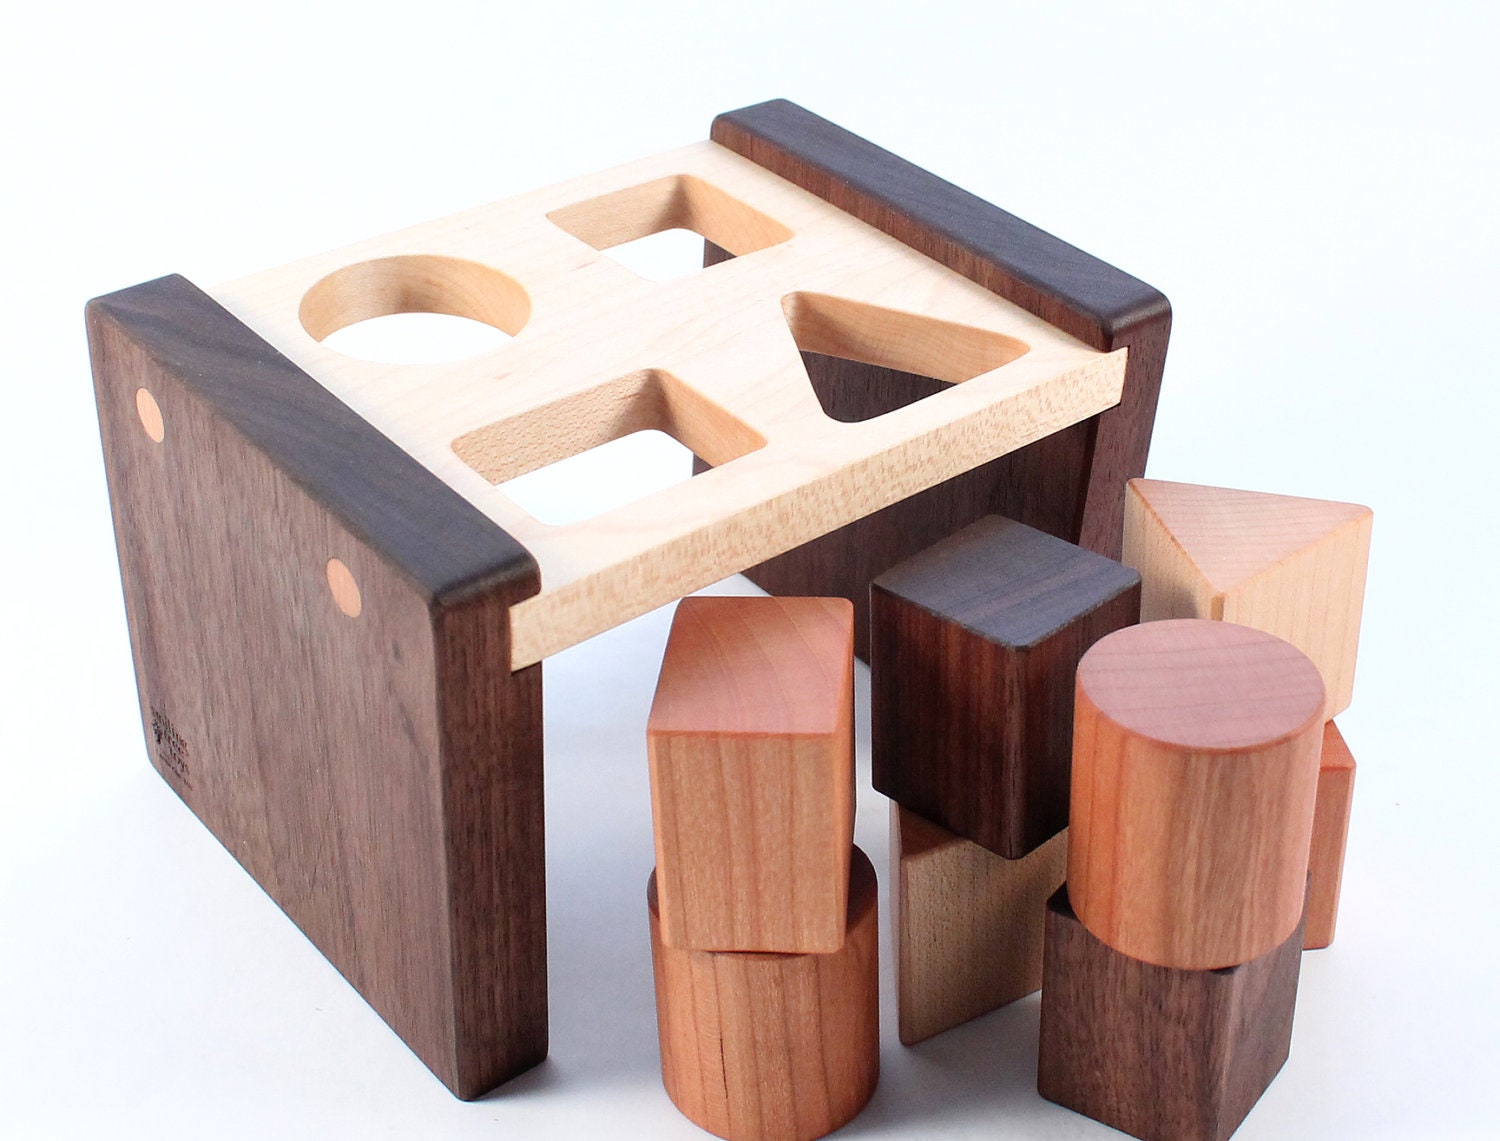 wooden shape sorter toy - a natural and organic educational wood toy, learning fun for baby and toddler - SmilingTreeToys